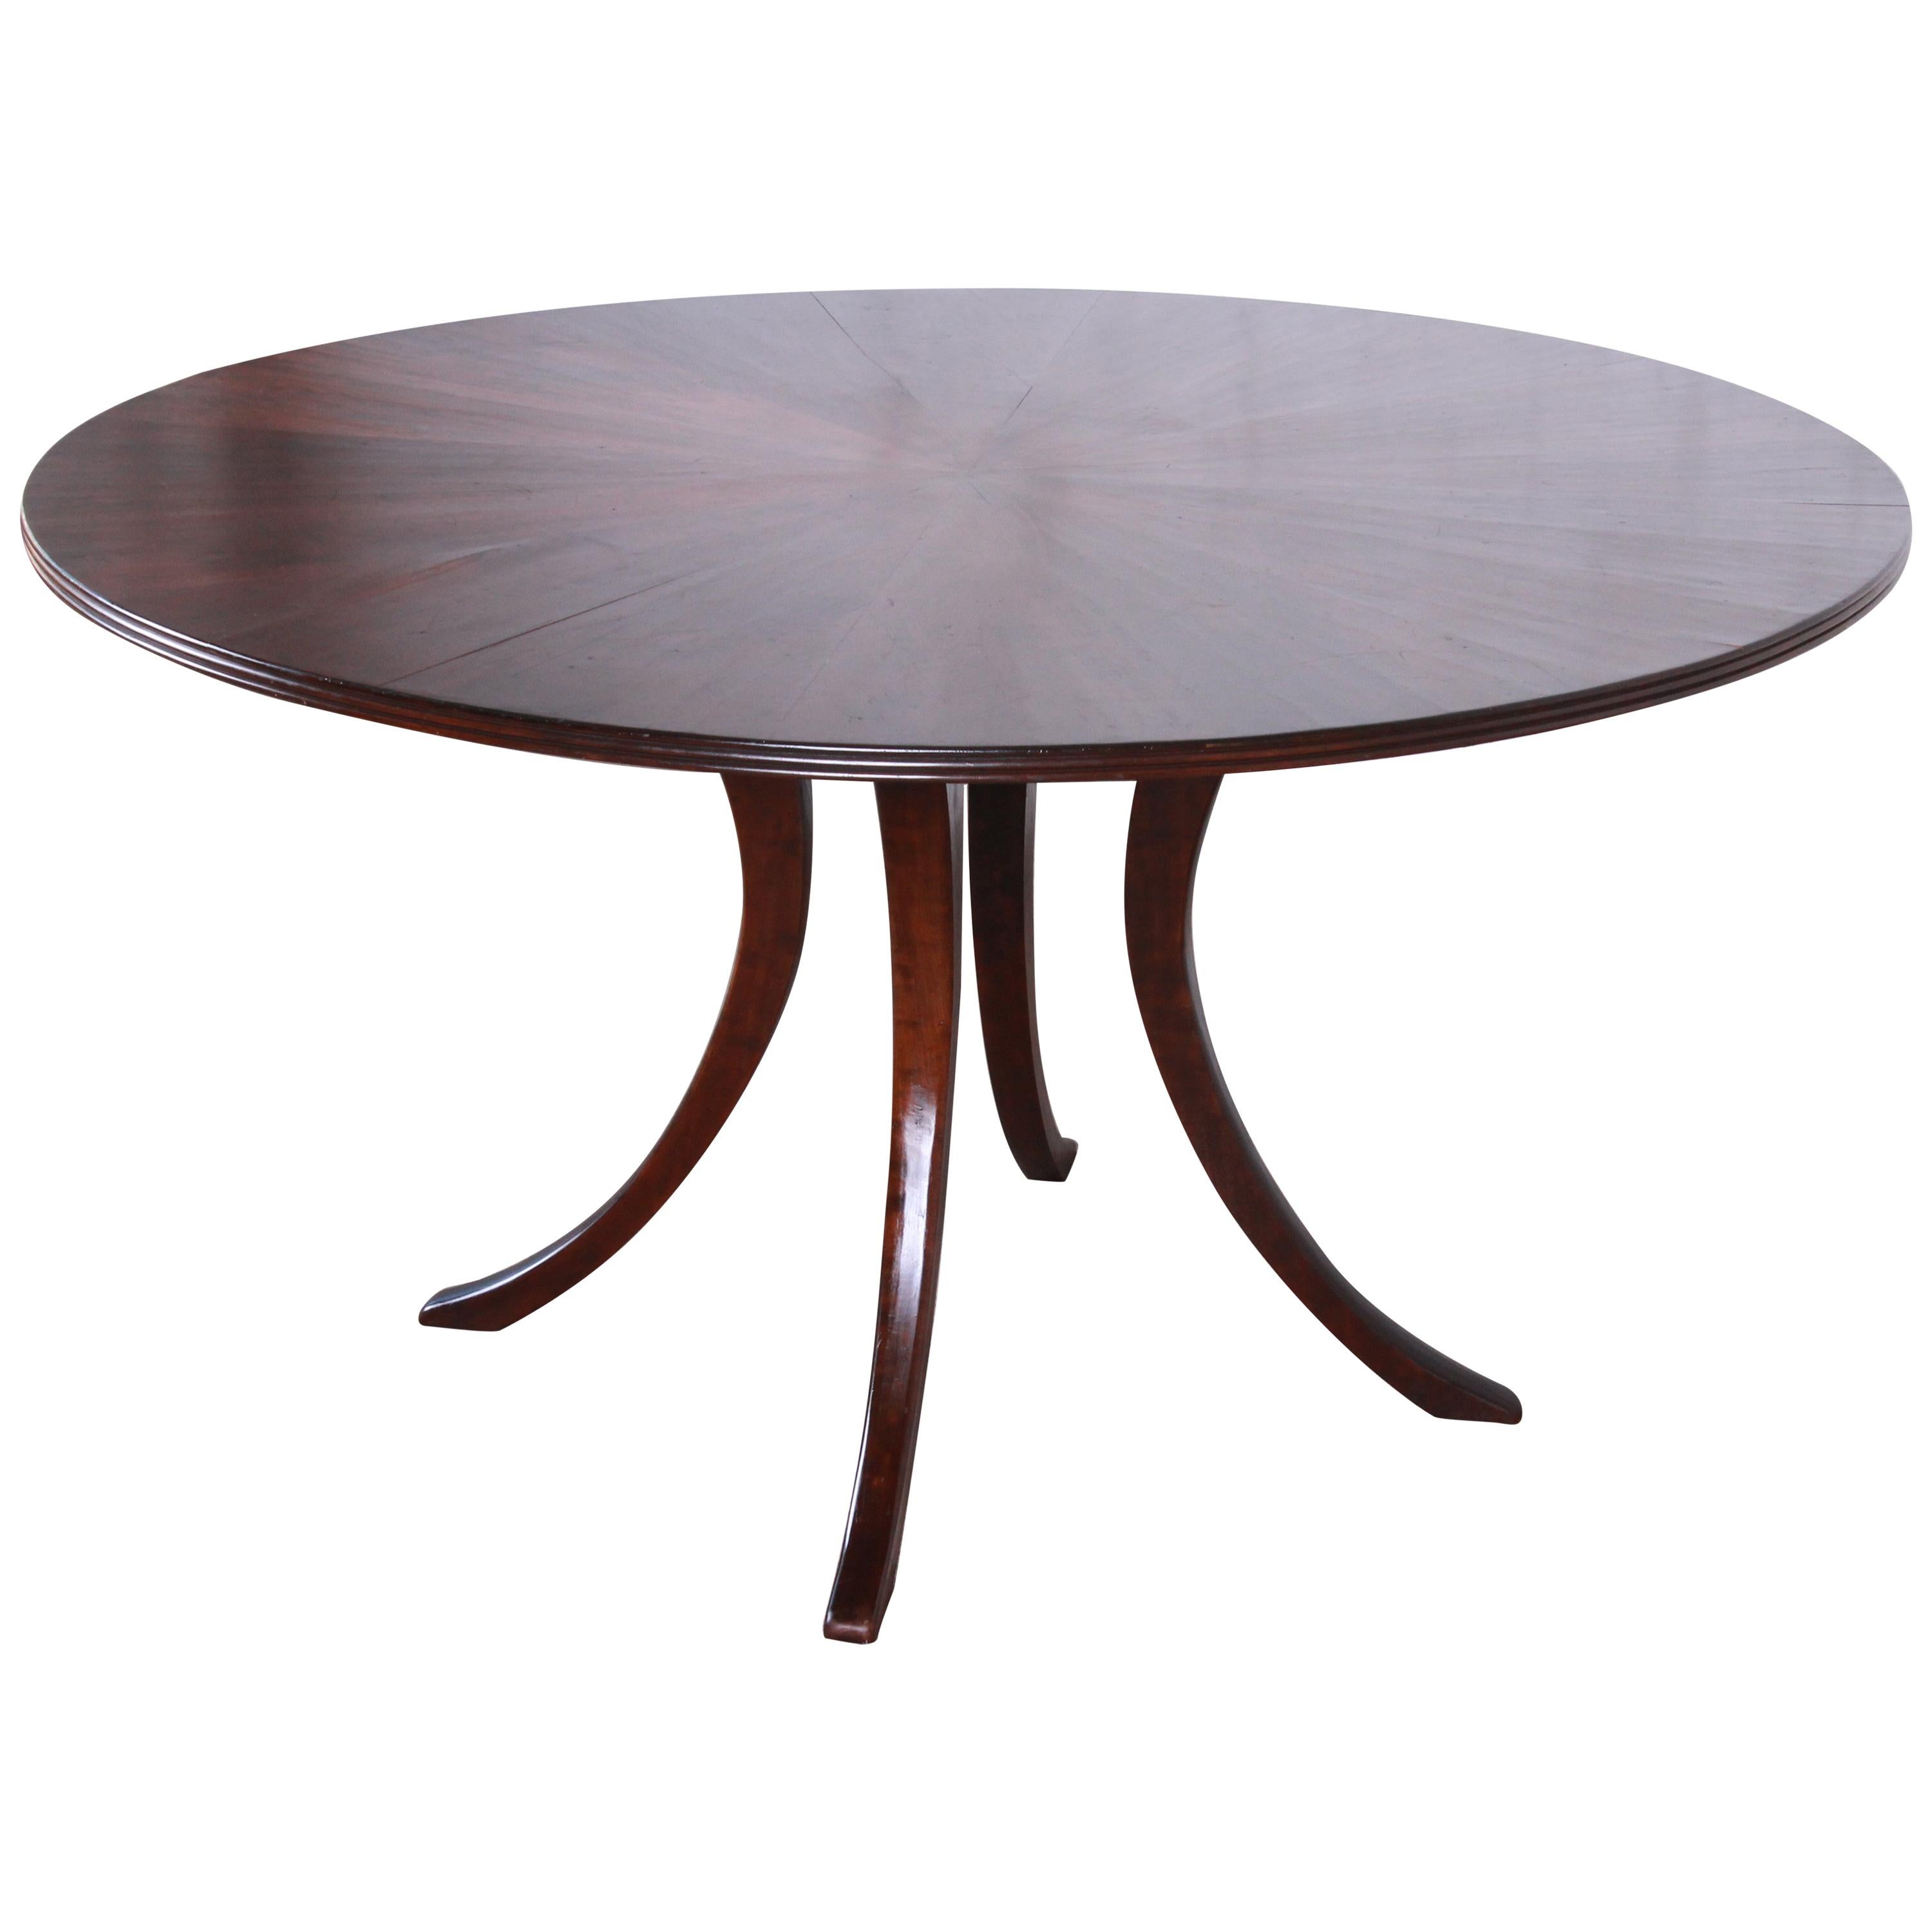 Modern Walnut Saber Leg Dining Table with Inlaid Starburst Parquetry Top